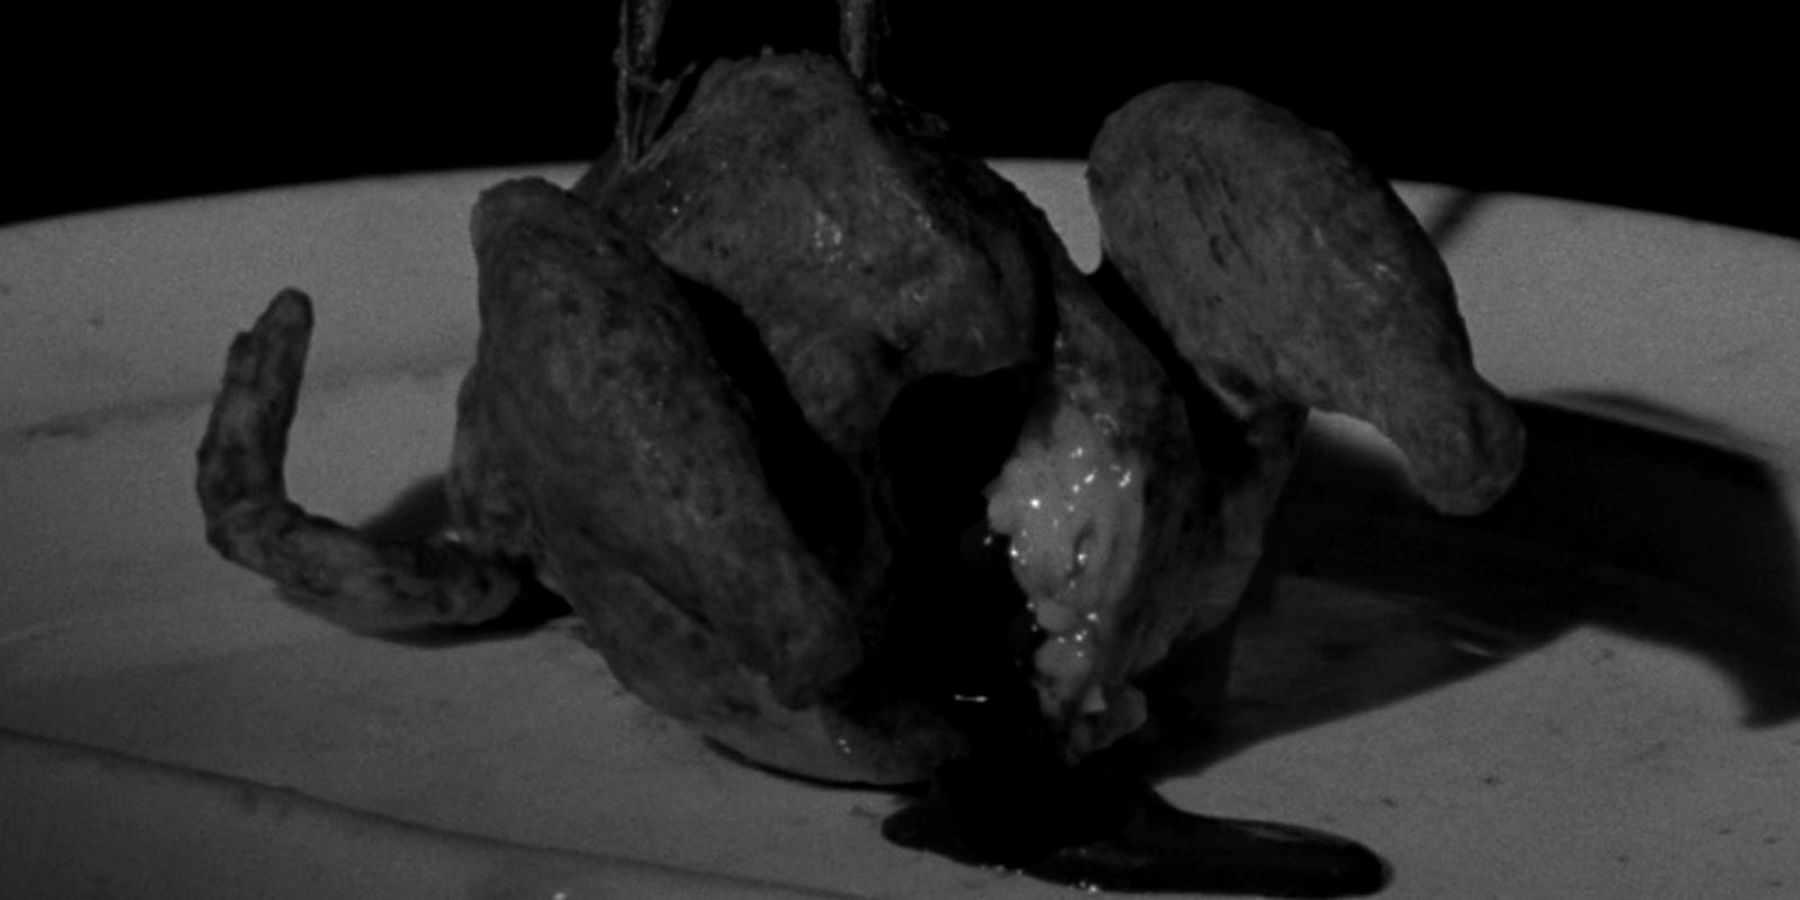 FREE HORROR eraserhead-chicken-Cropped 5 Unsettling Food Scenes In Horror Movies 